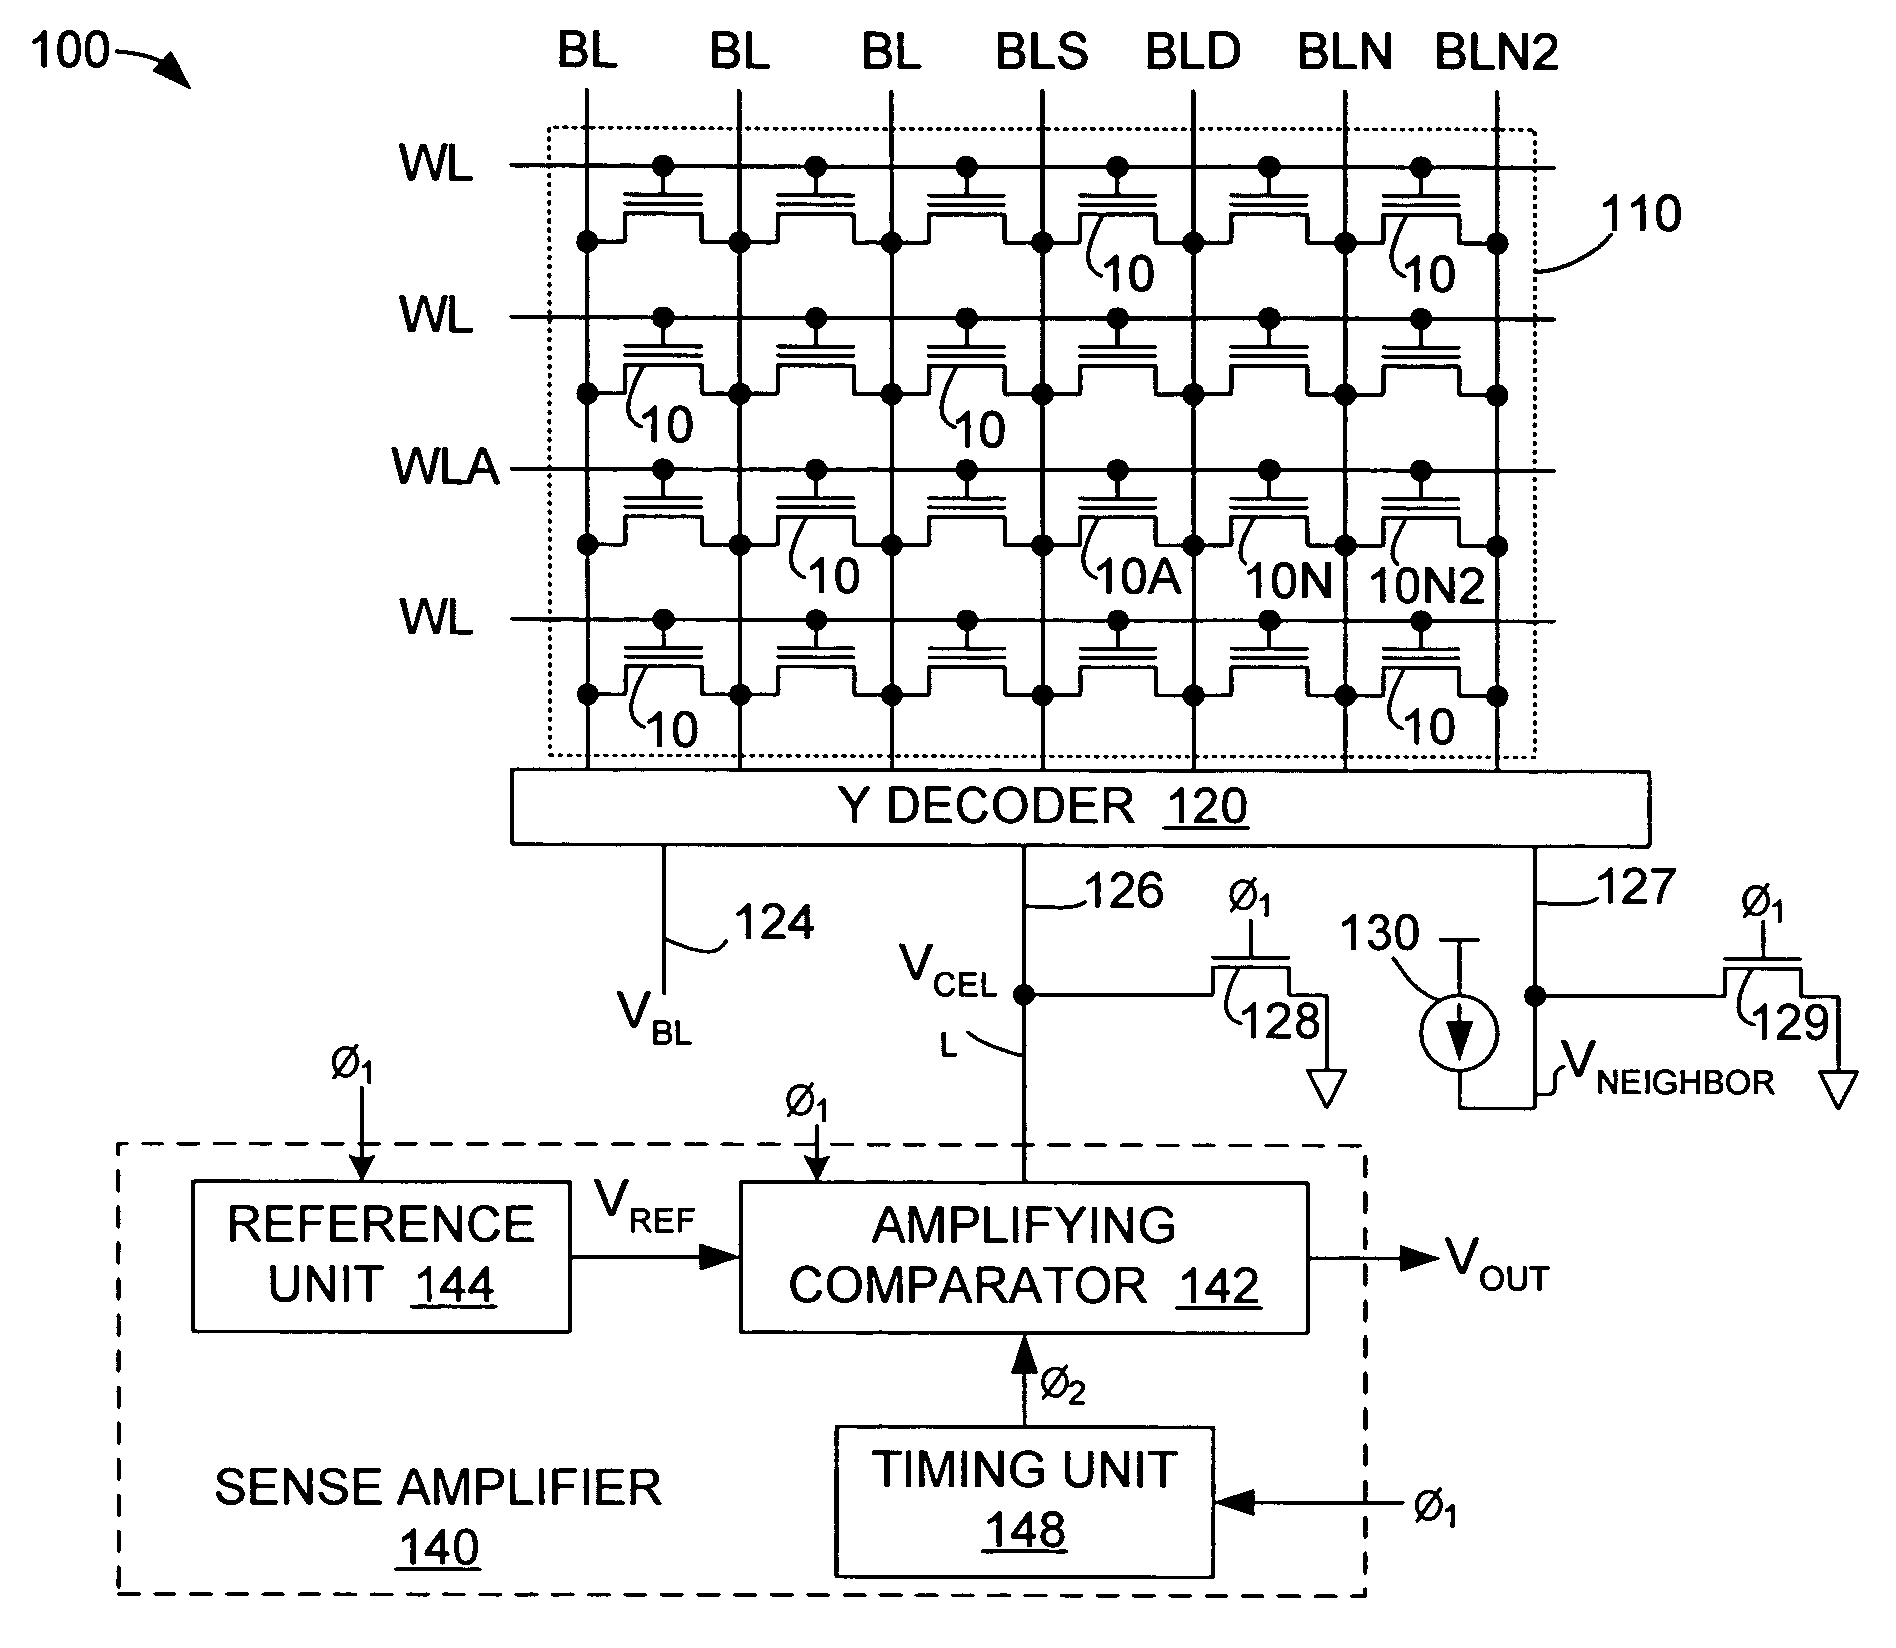 Neighbor effect cancellation in memory array architecture